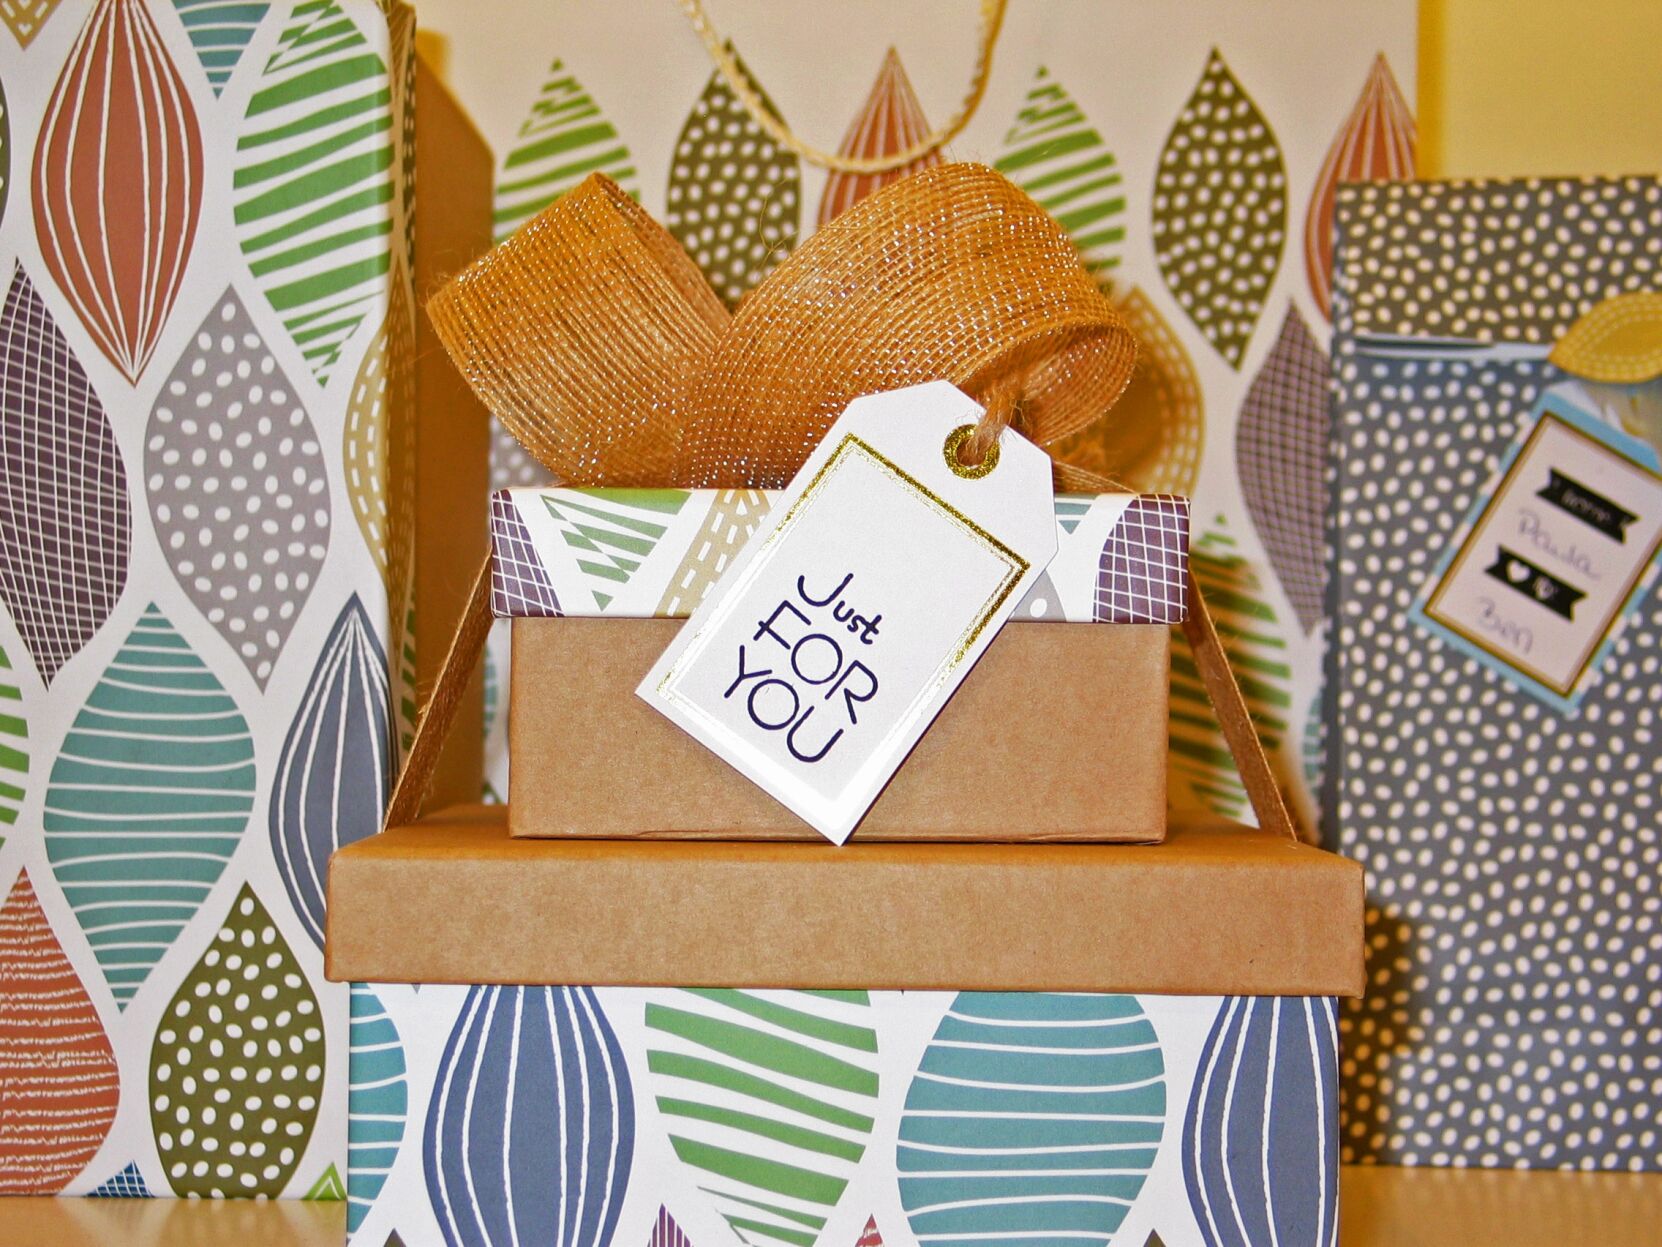 Handmade Gifts from Etsy that Everyone Will Love